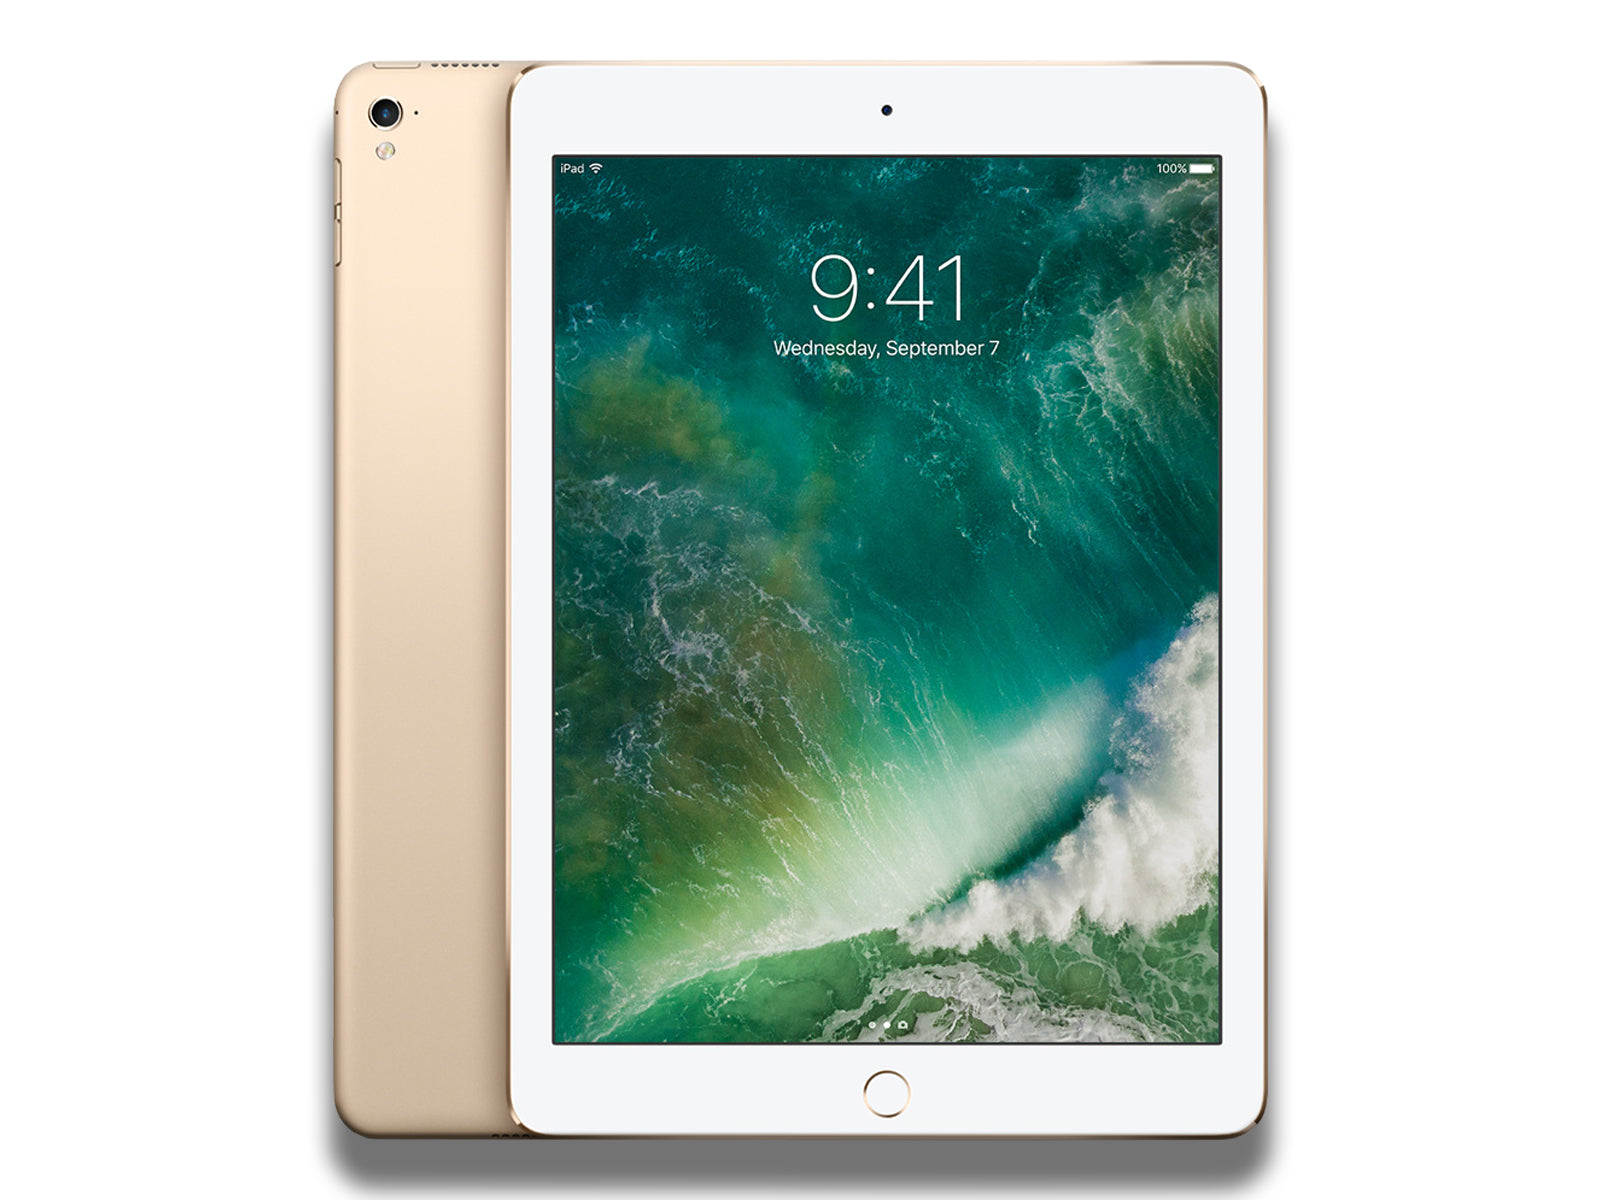 Image shows the gold Apple iPad Pro 9.7-inch